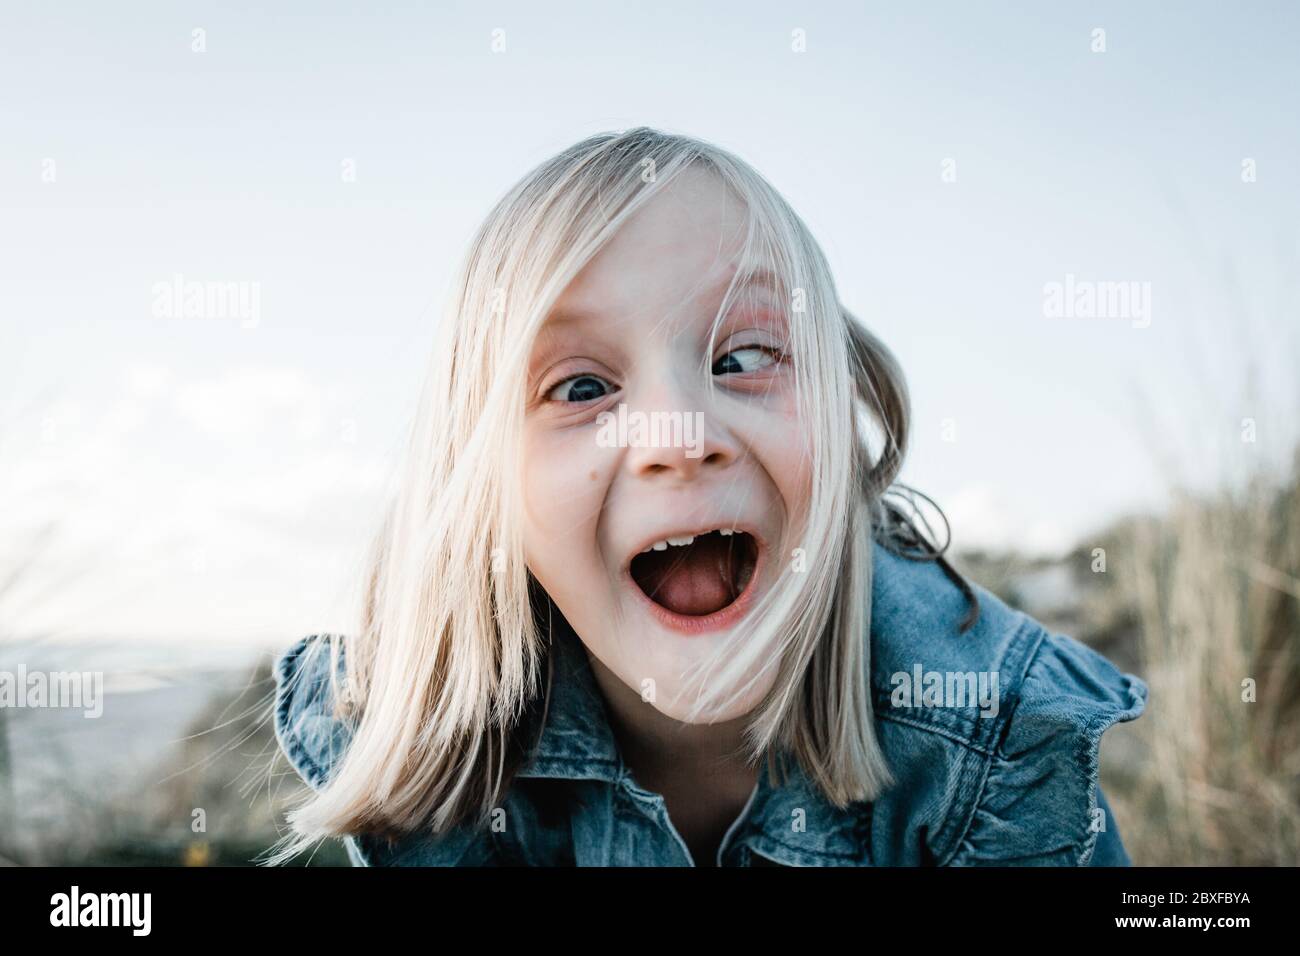 Young girl doing a funny face Stock Photo